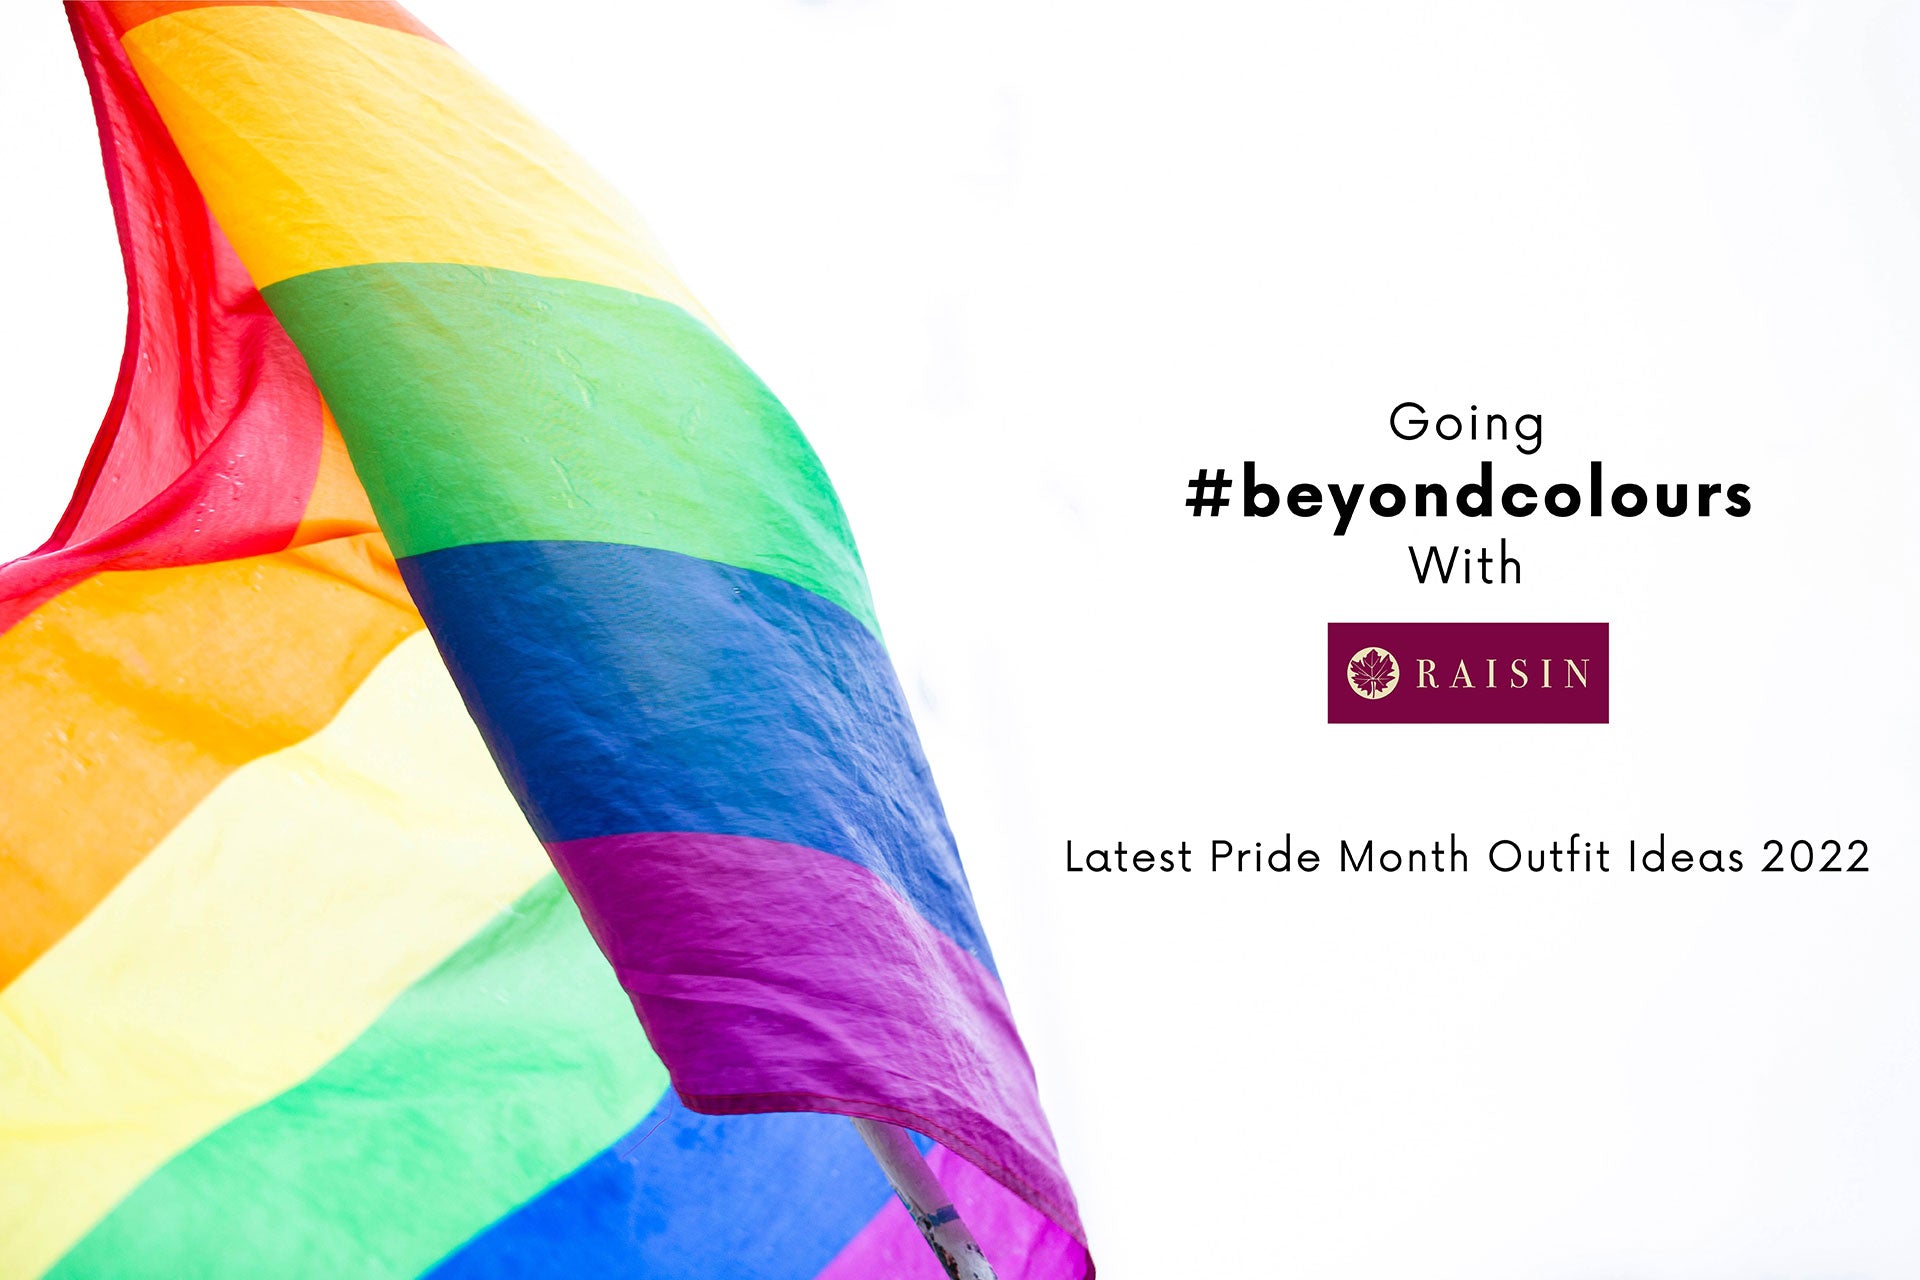 Going #beyondcolours With Raisin: Latest Pride Month Outfit Ideas 2022